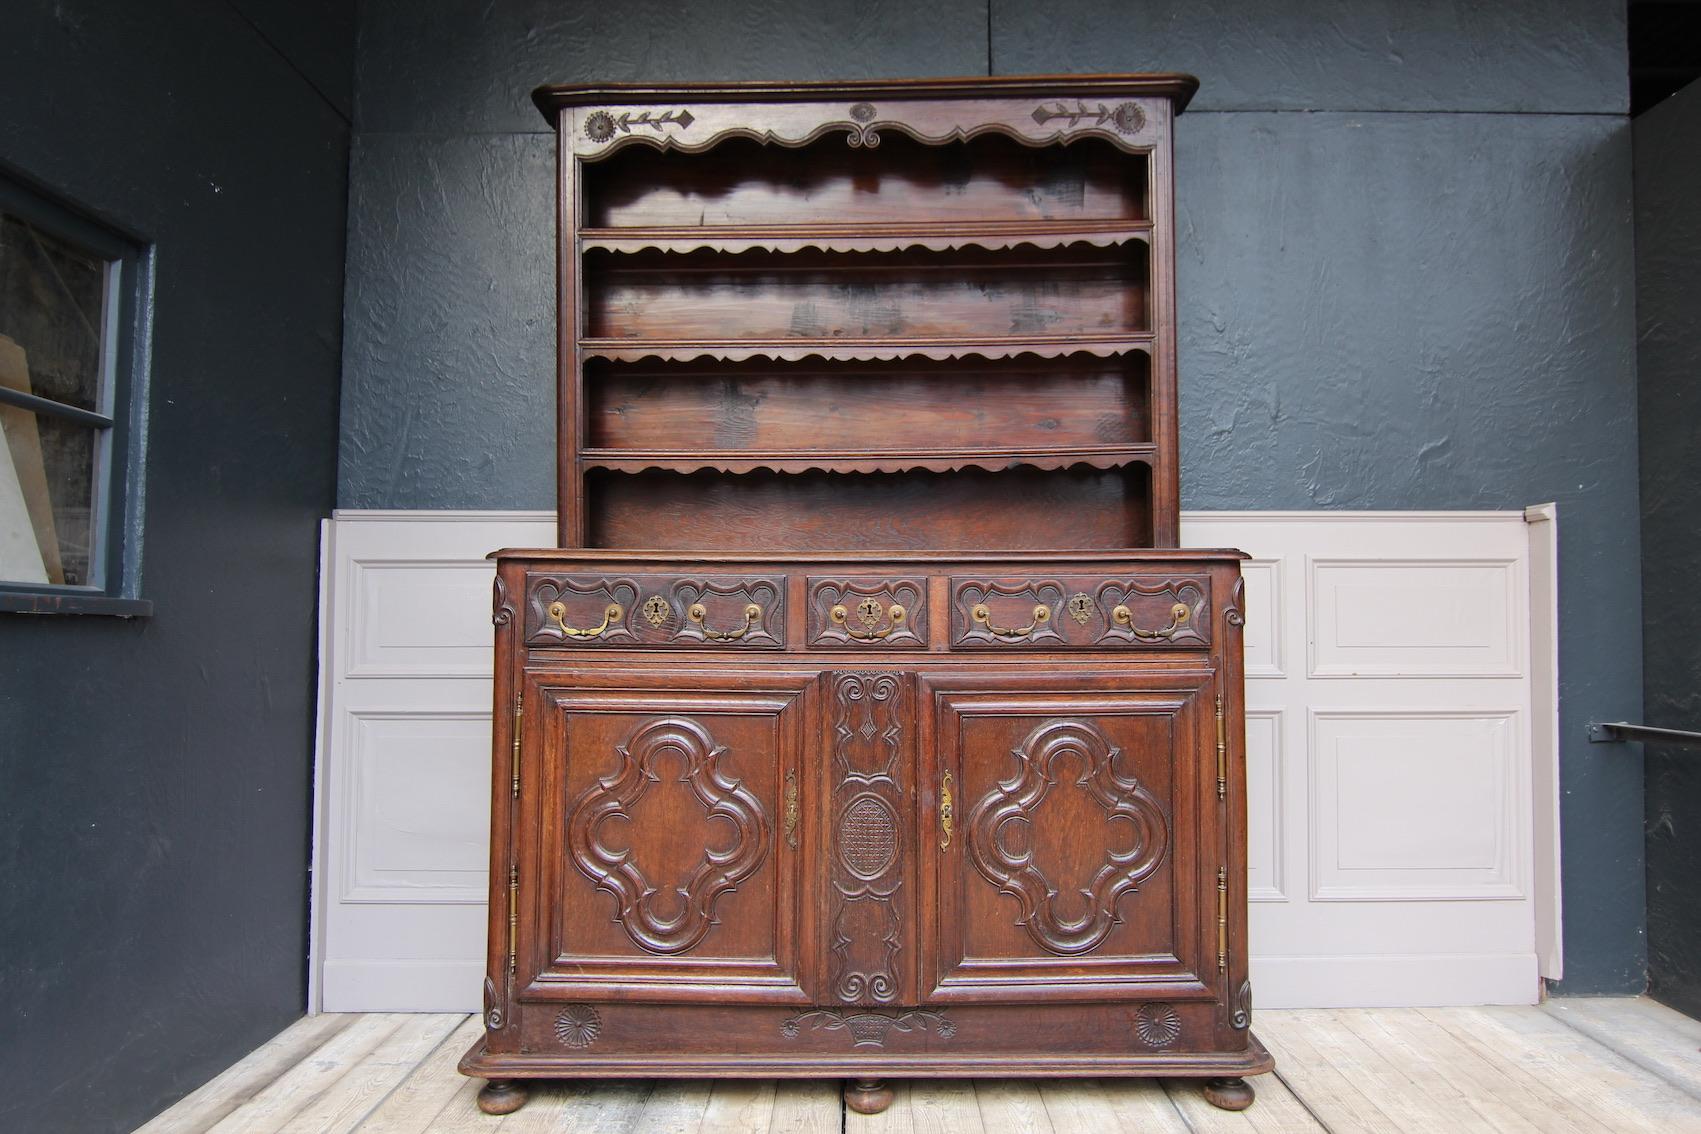 French buffet (Vaisselier) made of oak, Lorraine, circa 1780.

Consisting of a base cabinet with 2 doors and 3 drawers above, as well as a shelf.
Body with rounded corners, partially carved. Profiled doors on large outside brass fittings. Door